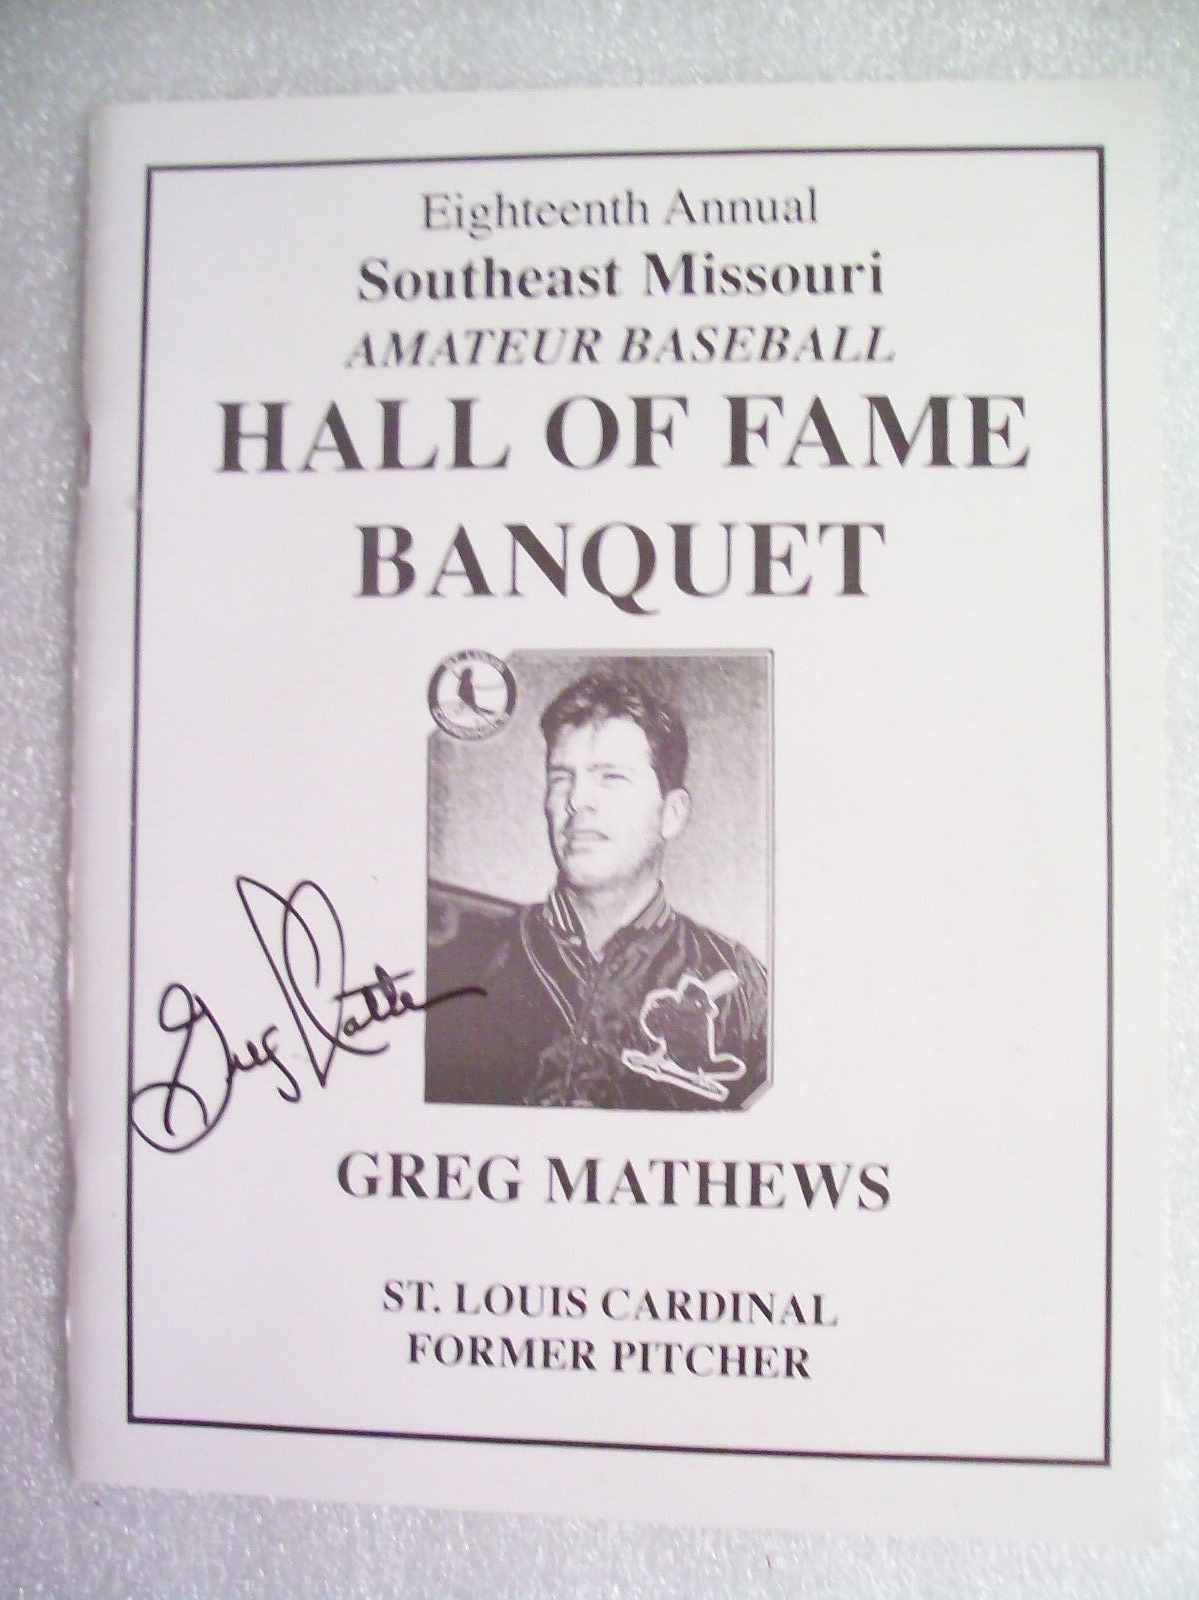 1986 8th Annual Southeast Mo Hall Of Fame Banquet Greg Mathews Signed, Cardinals